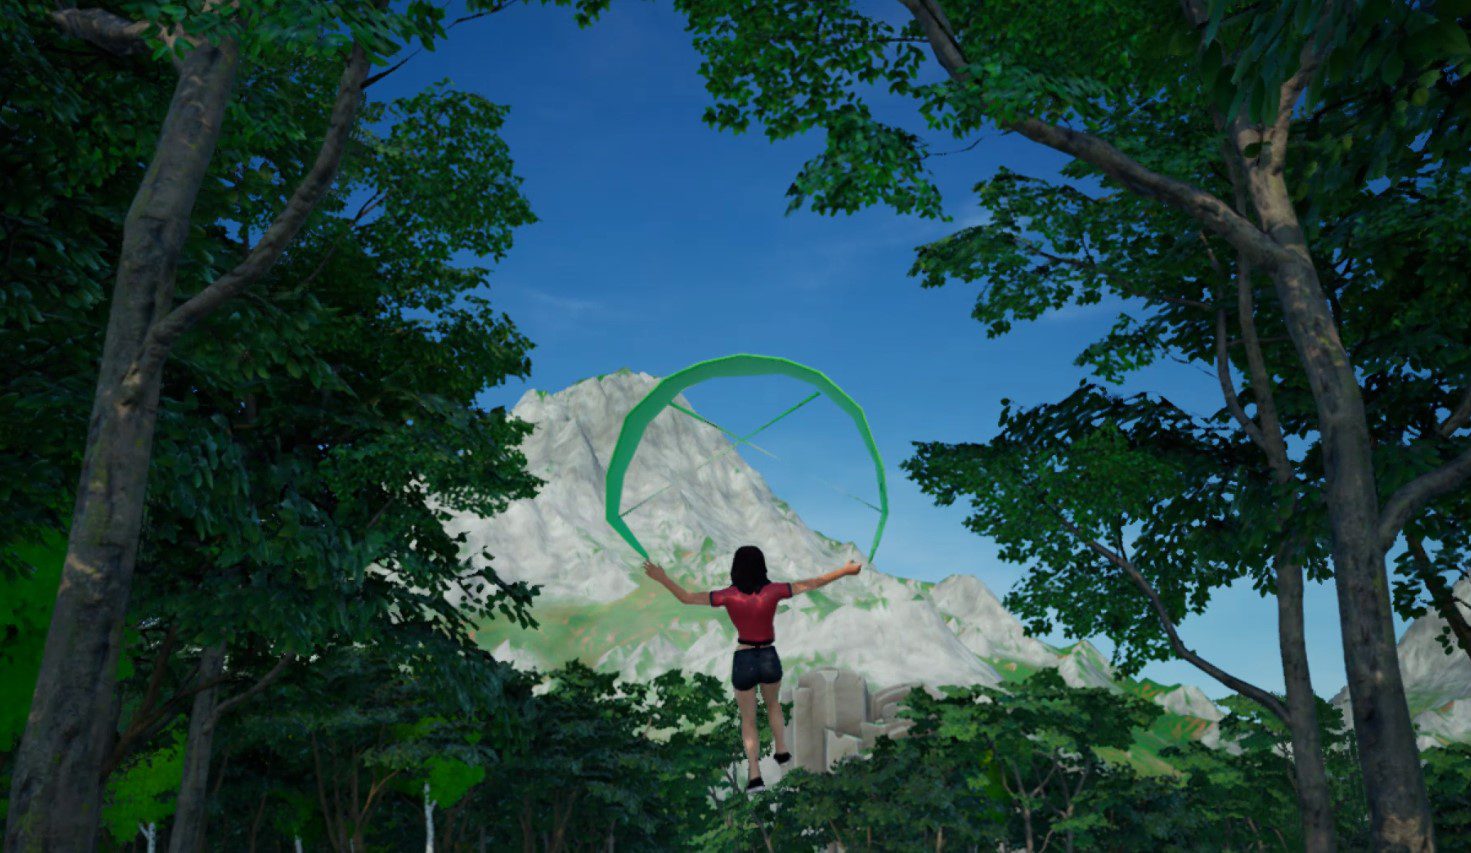 An animated person holding a curved green object in a forest environment